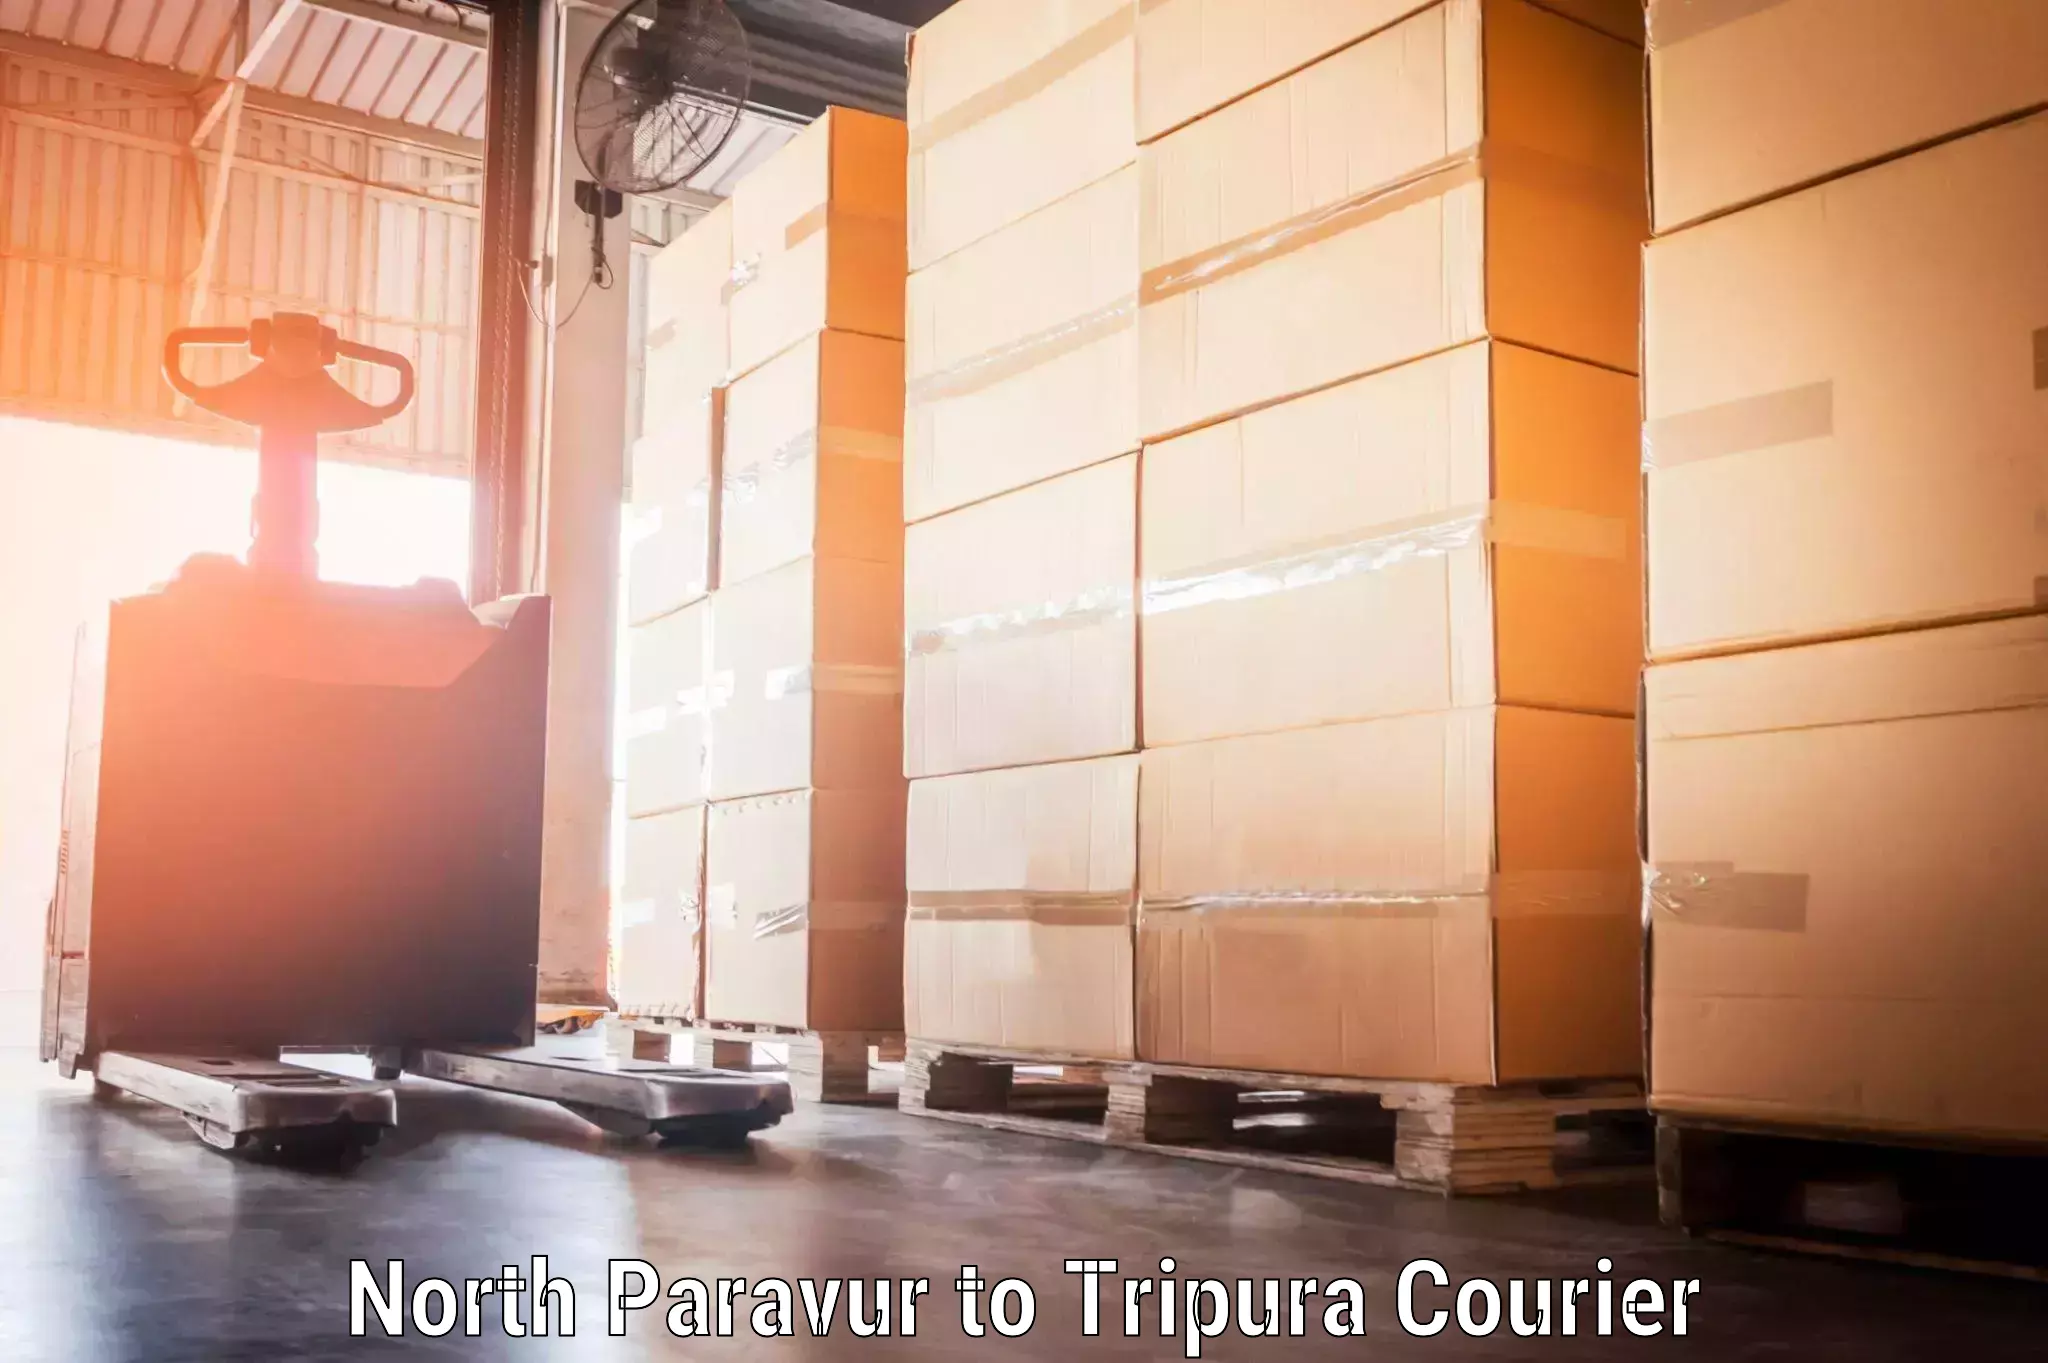 Baggage shipping advice North Paravur to Udaipur Tripura